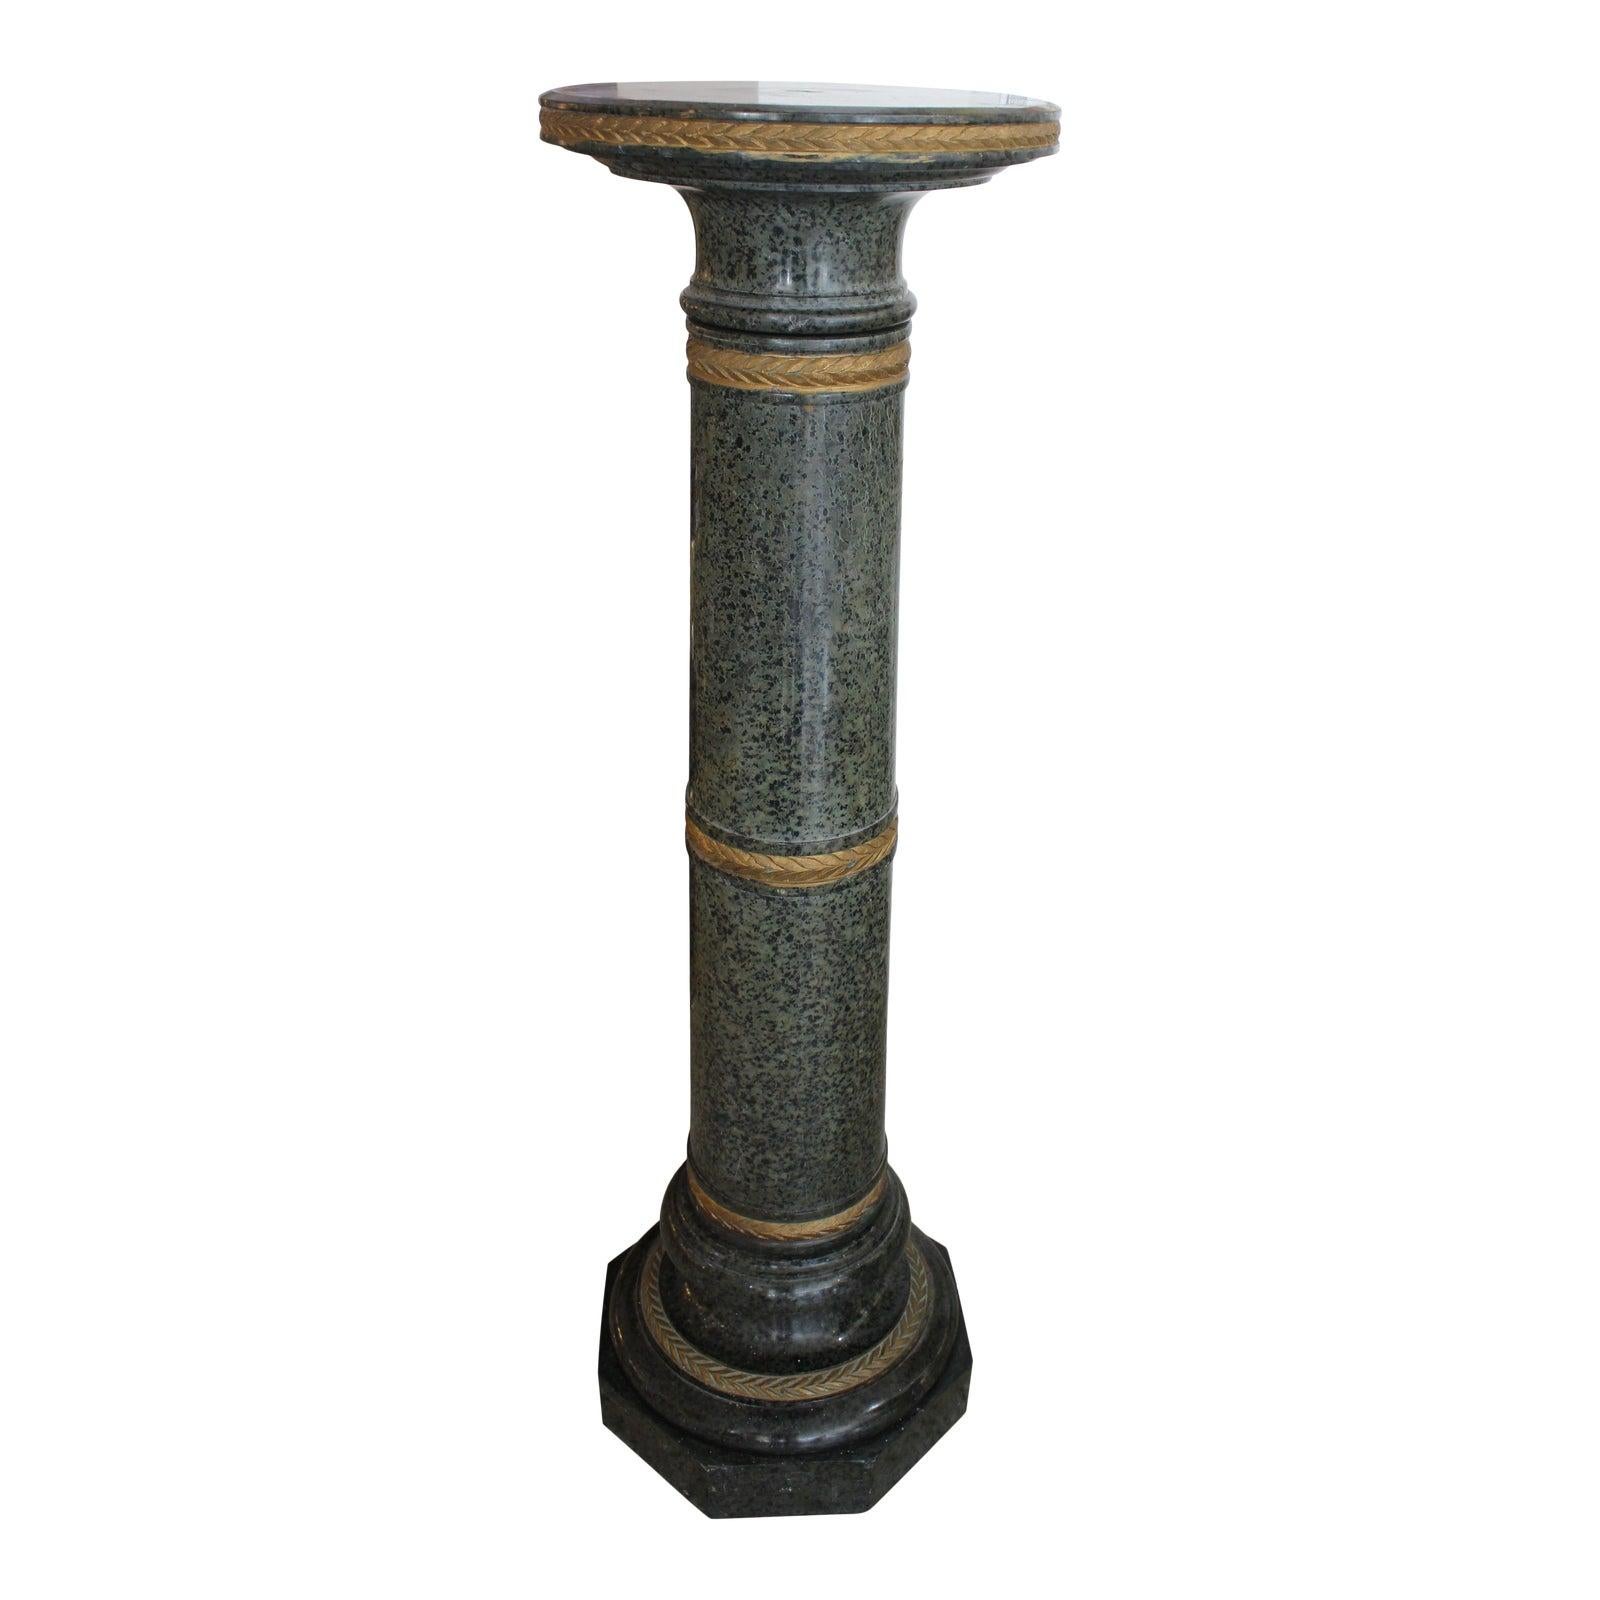  Italian Marble Pedestal with Gold Accents